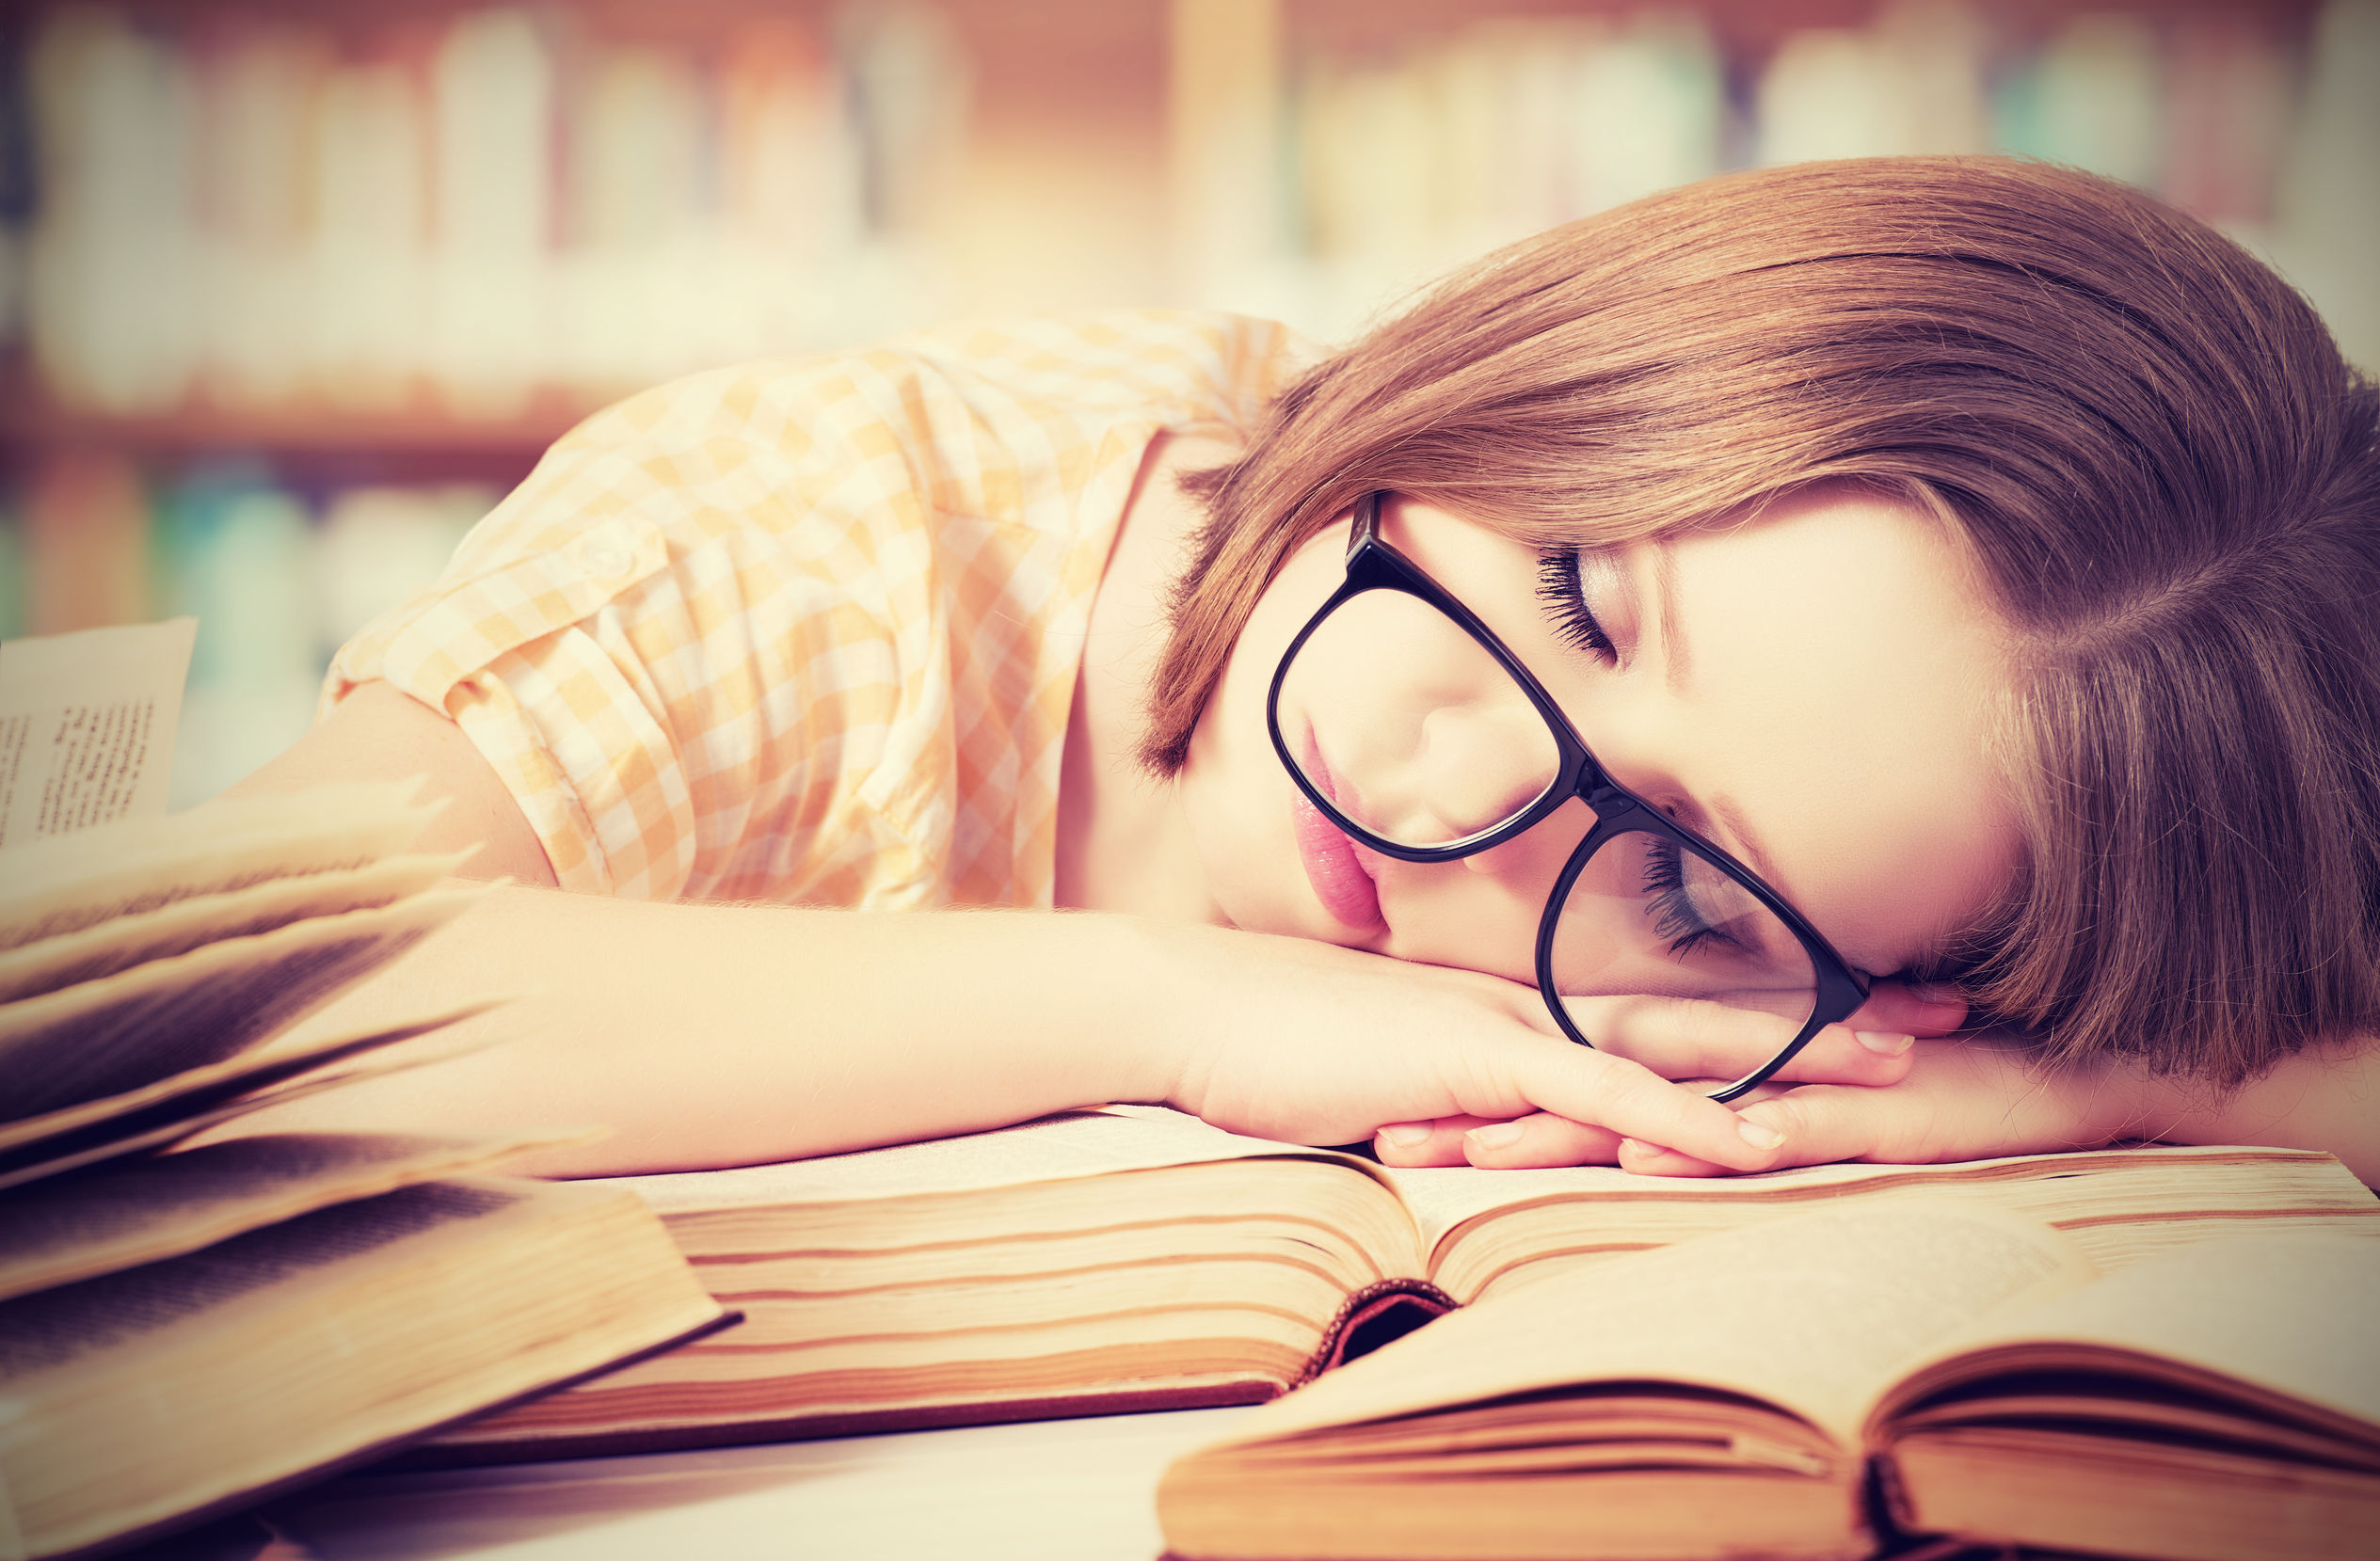 26519532 - tired student girl with glasses sleeping on the books in the library